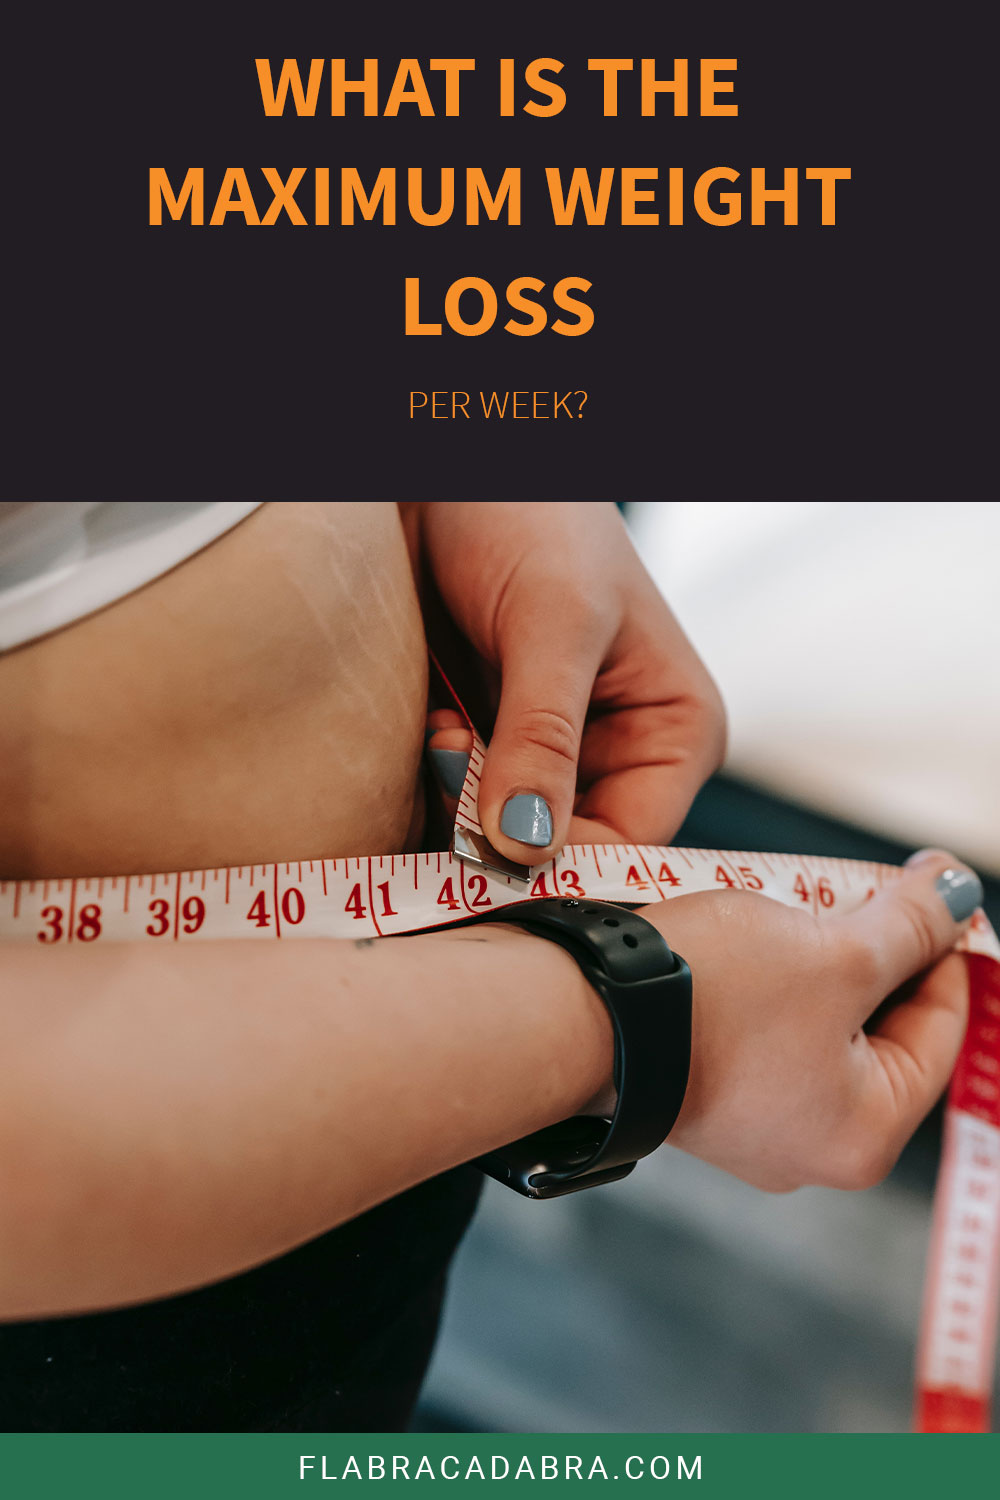 What Is The Maximum Weight Loss Per Week?